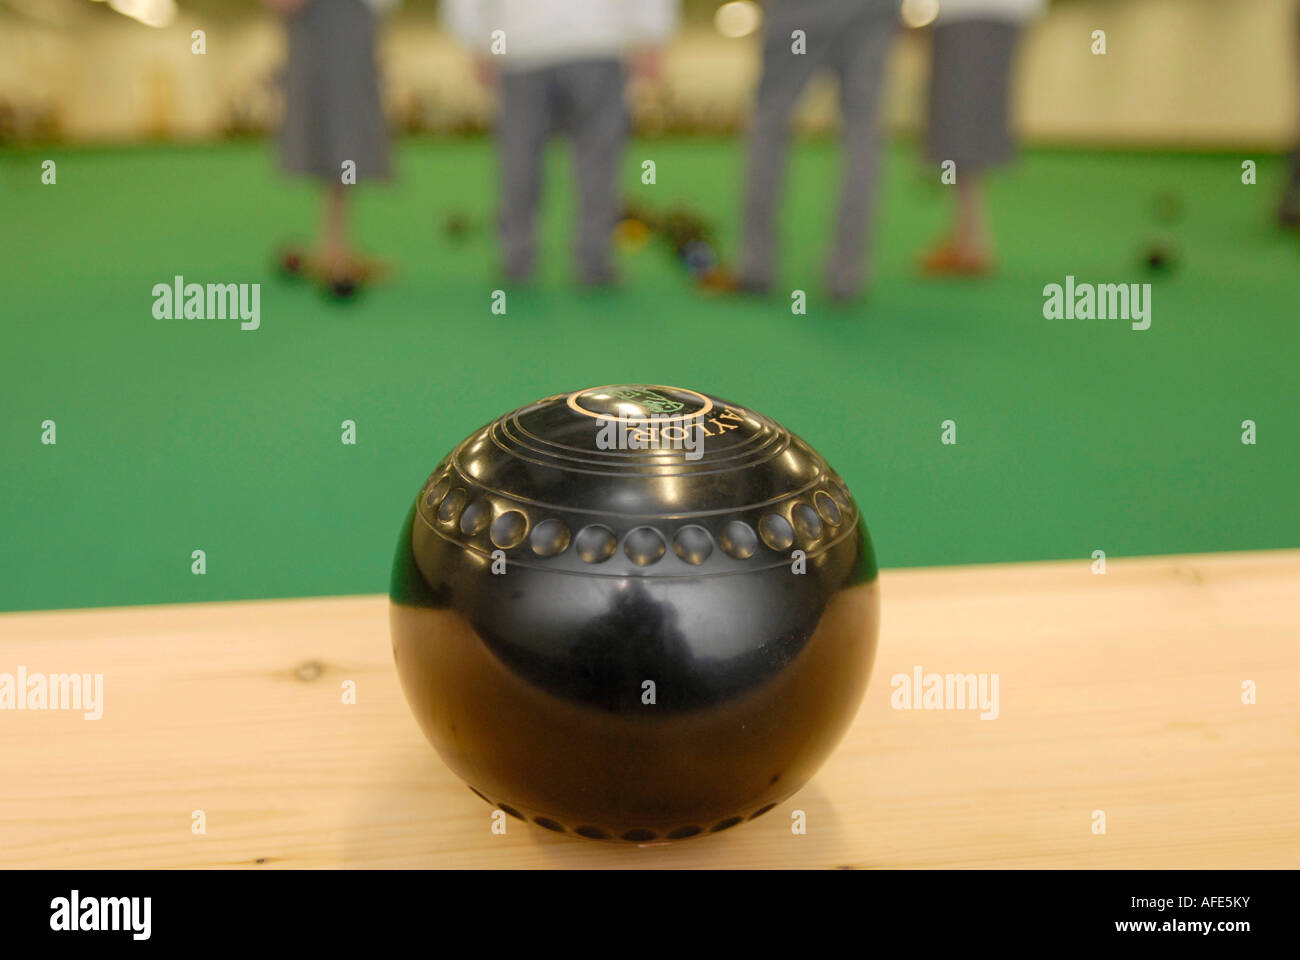 Bowling ball with bowlers at an indoor bowls green Stock Photo